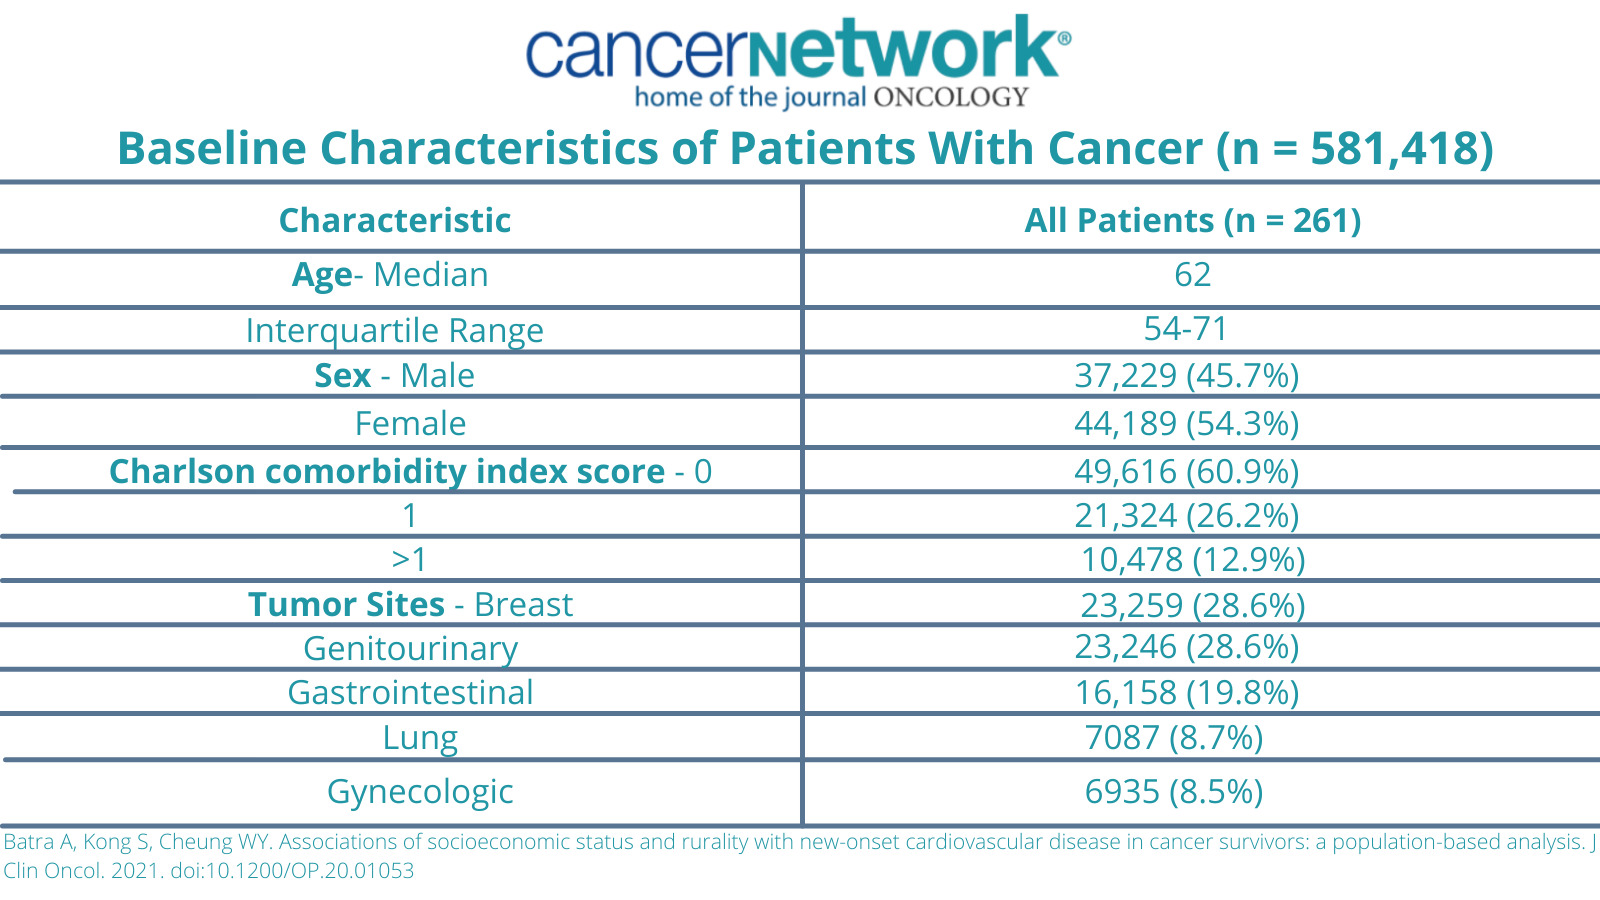 Baseline Characteristics of Patients With Cancer (n = 581,418)